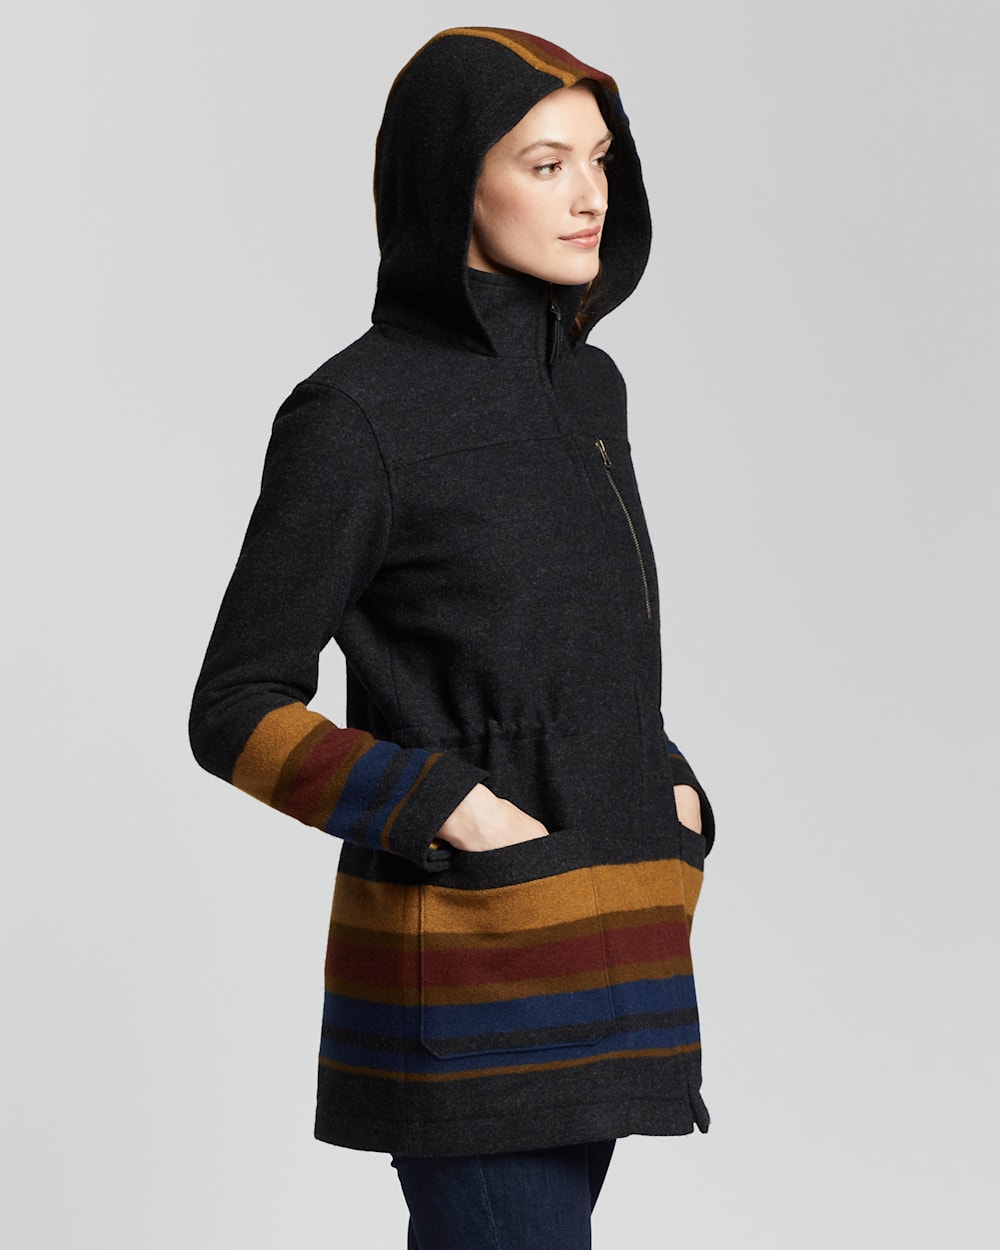 ALTERNATE VIEW OF WOMEN'S YAKIMA STRIPE WOOL PARKA IN CHARCOAL image number 2